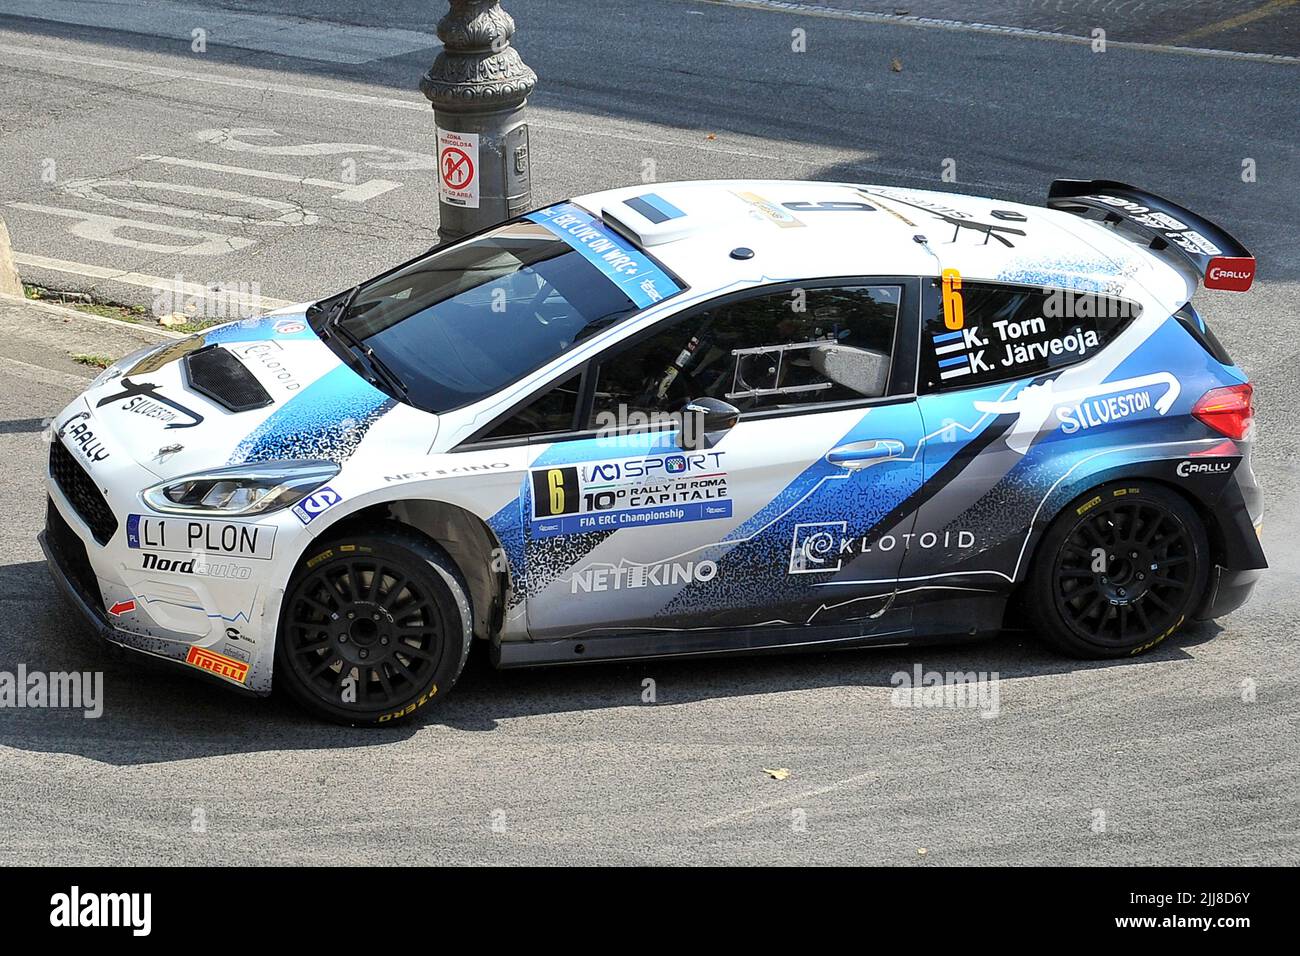 The driver Ken Torn and his Ken Järveoja aboard their Ford Fiesta MK2  car, during the Colle San Maro - Roccasecca stage of the 10 edition of the FIA European Rally Championship 'Rally di Roma Capitale' which was held in the Lazio region. Santopadre, Italy, 23 July 2022. (photo by Vincenzo Izzo/Sipa USA) Stock Photo